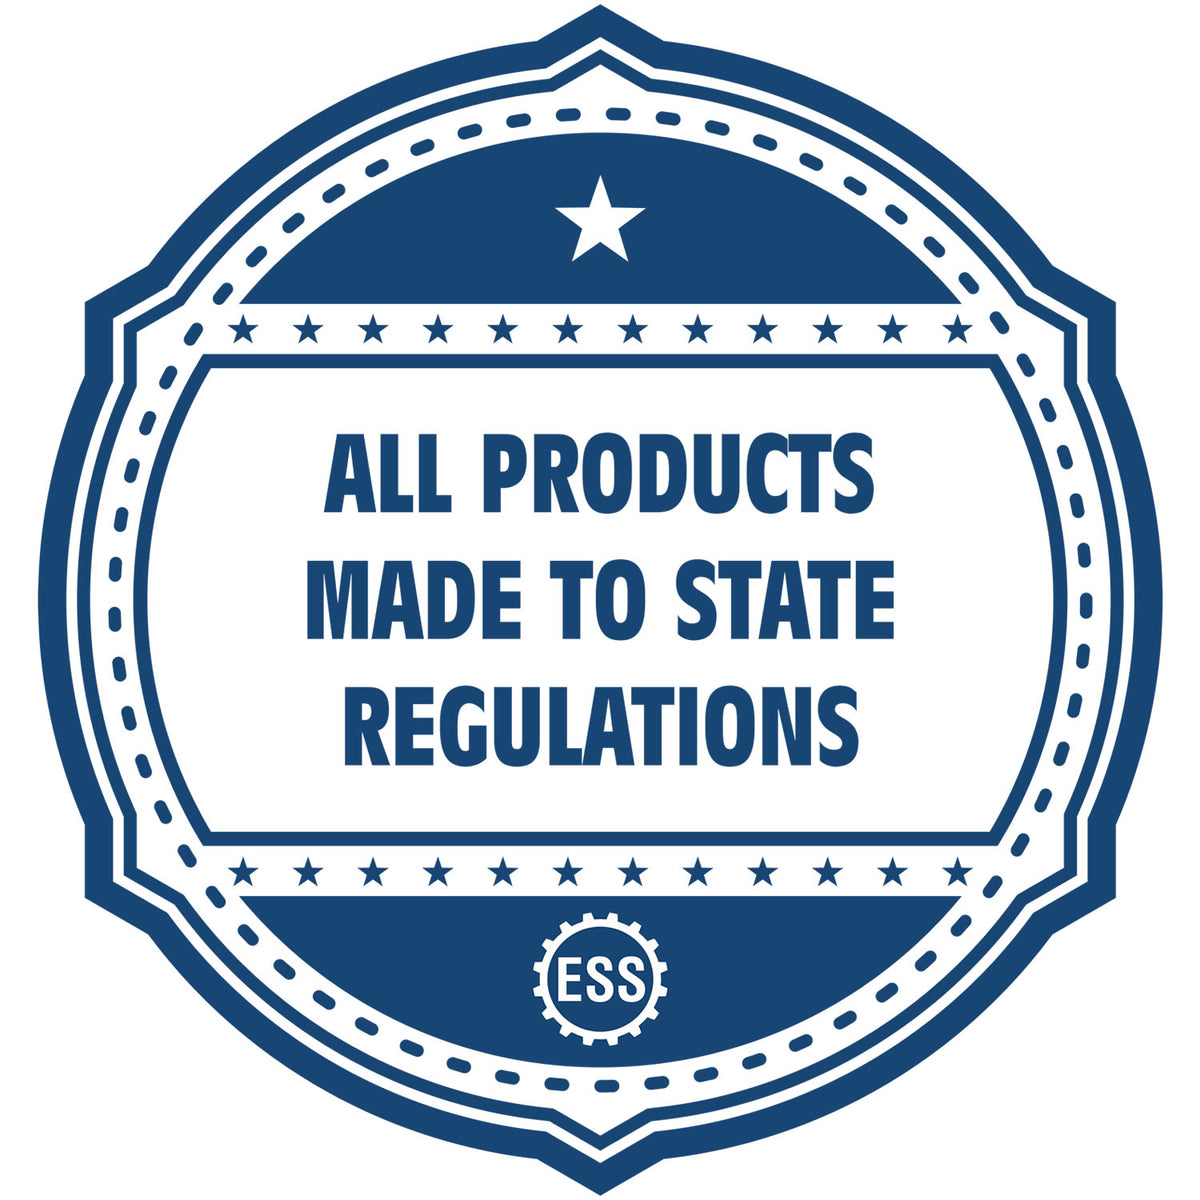 An icon or badge element for the Handheld Missouri Land Surveyor Seal showing that this product is made in compliance with state regulations.